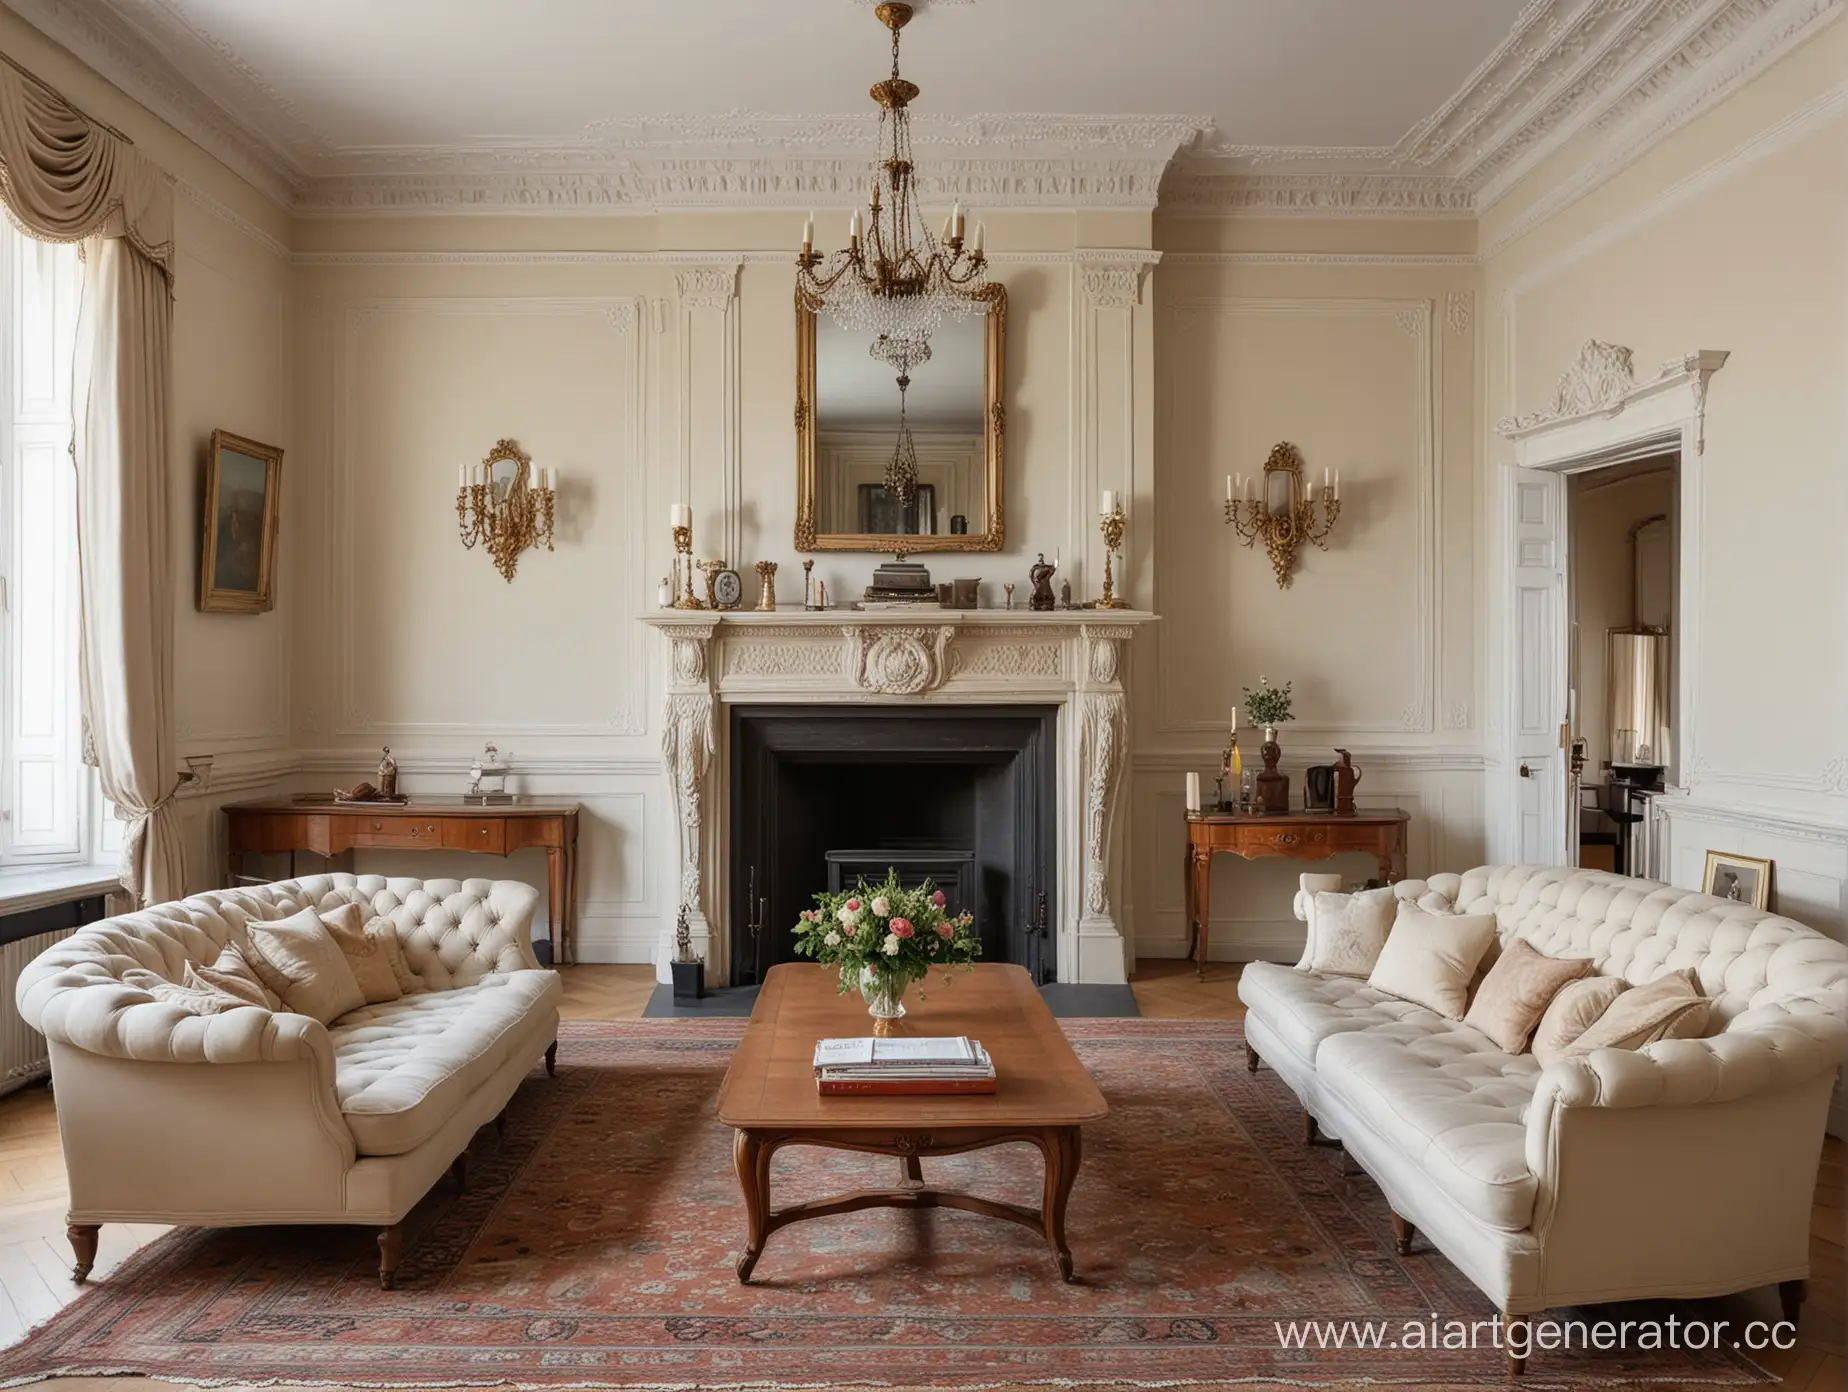 Late-19th-Century-Aristocratic-Living-Room-with-Fireplace-and-FabricCovered-Sofa